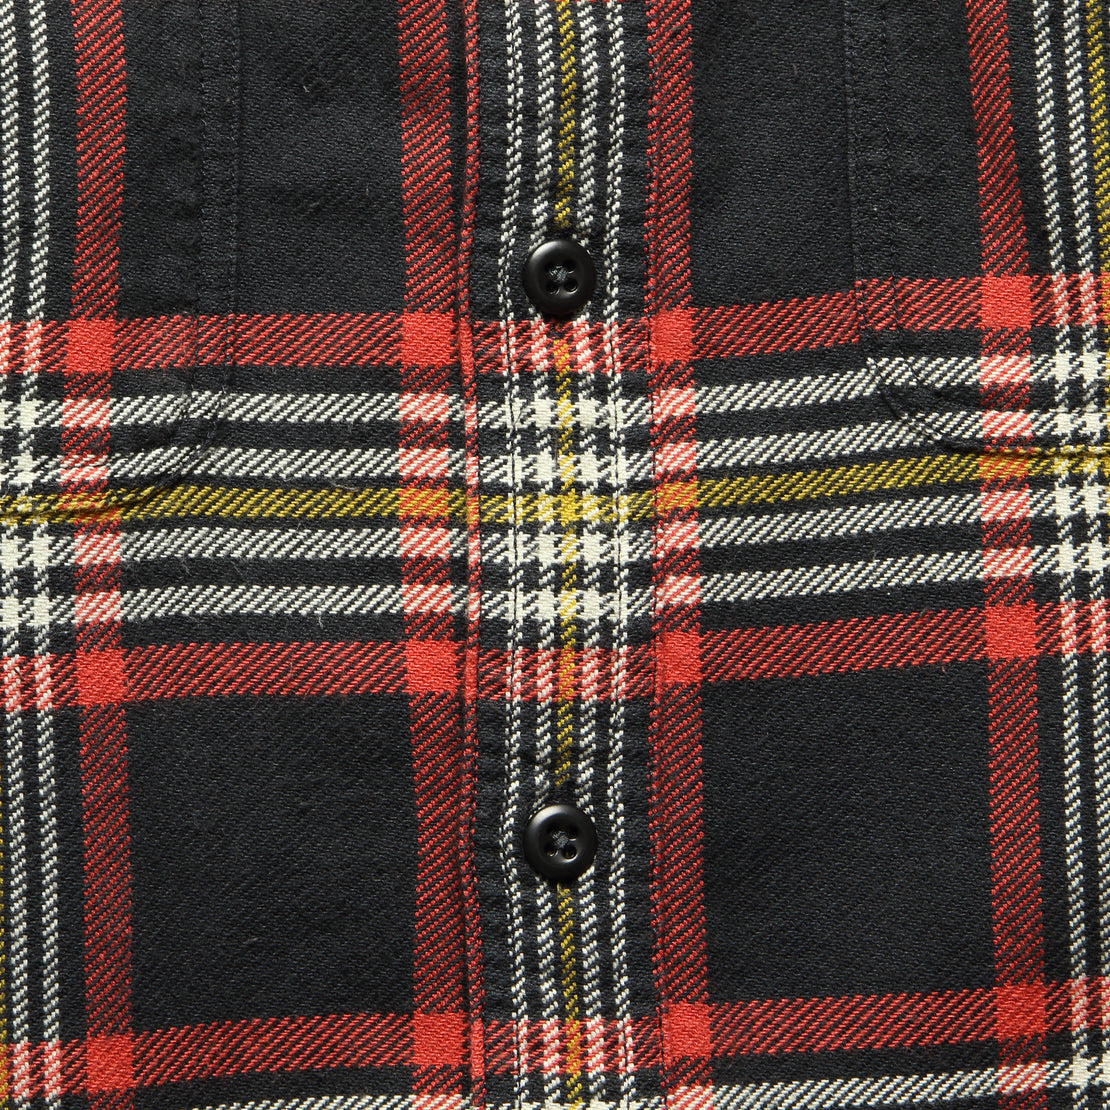 Vintage Flannel Workshirt - Black/Red/Gold - Filson - STAG Provisions - Tops - L/S Woven - Plaid